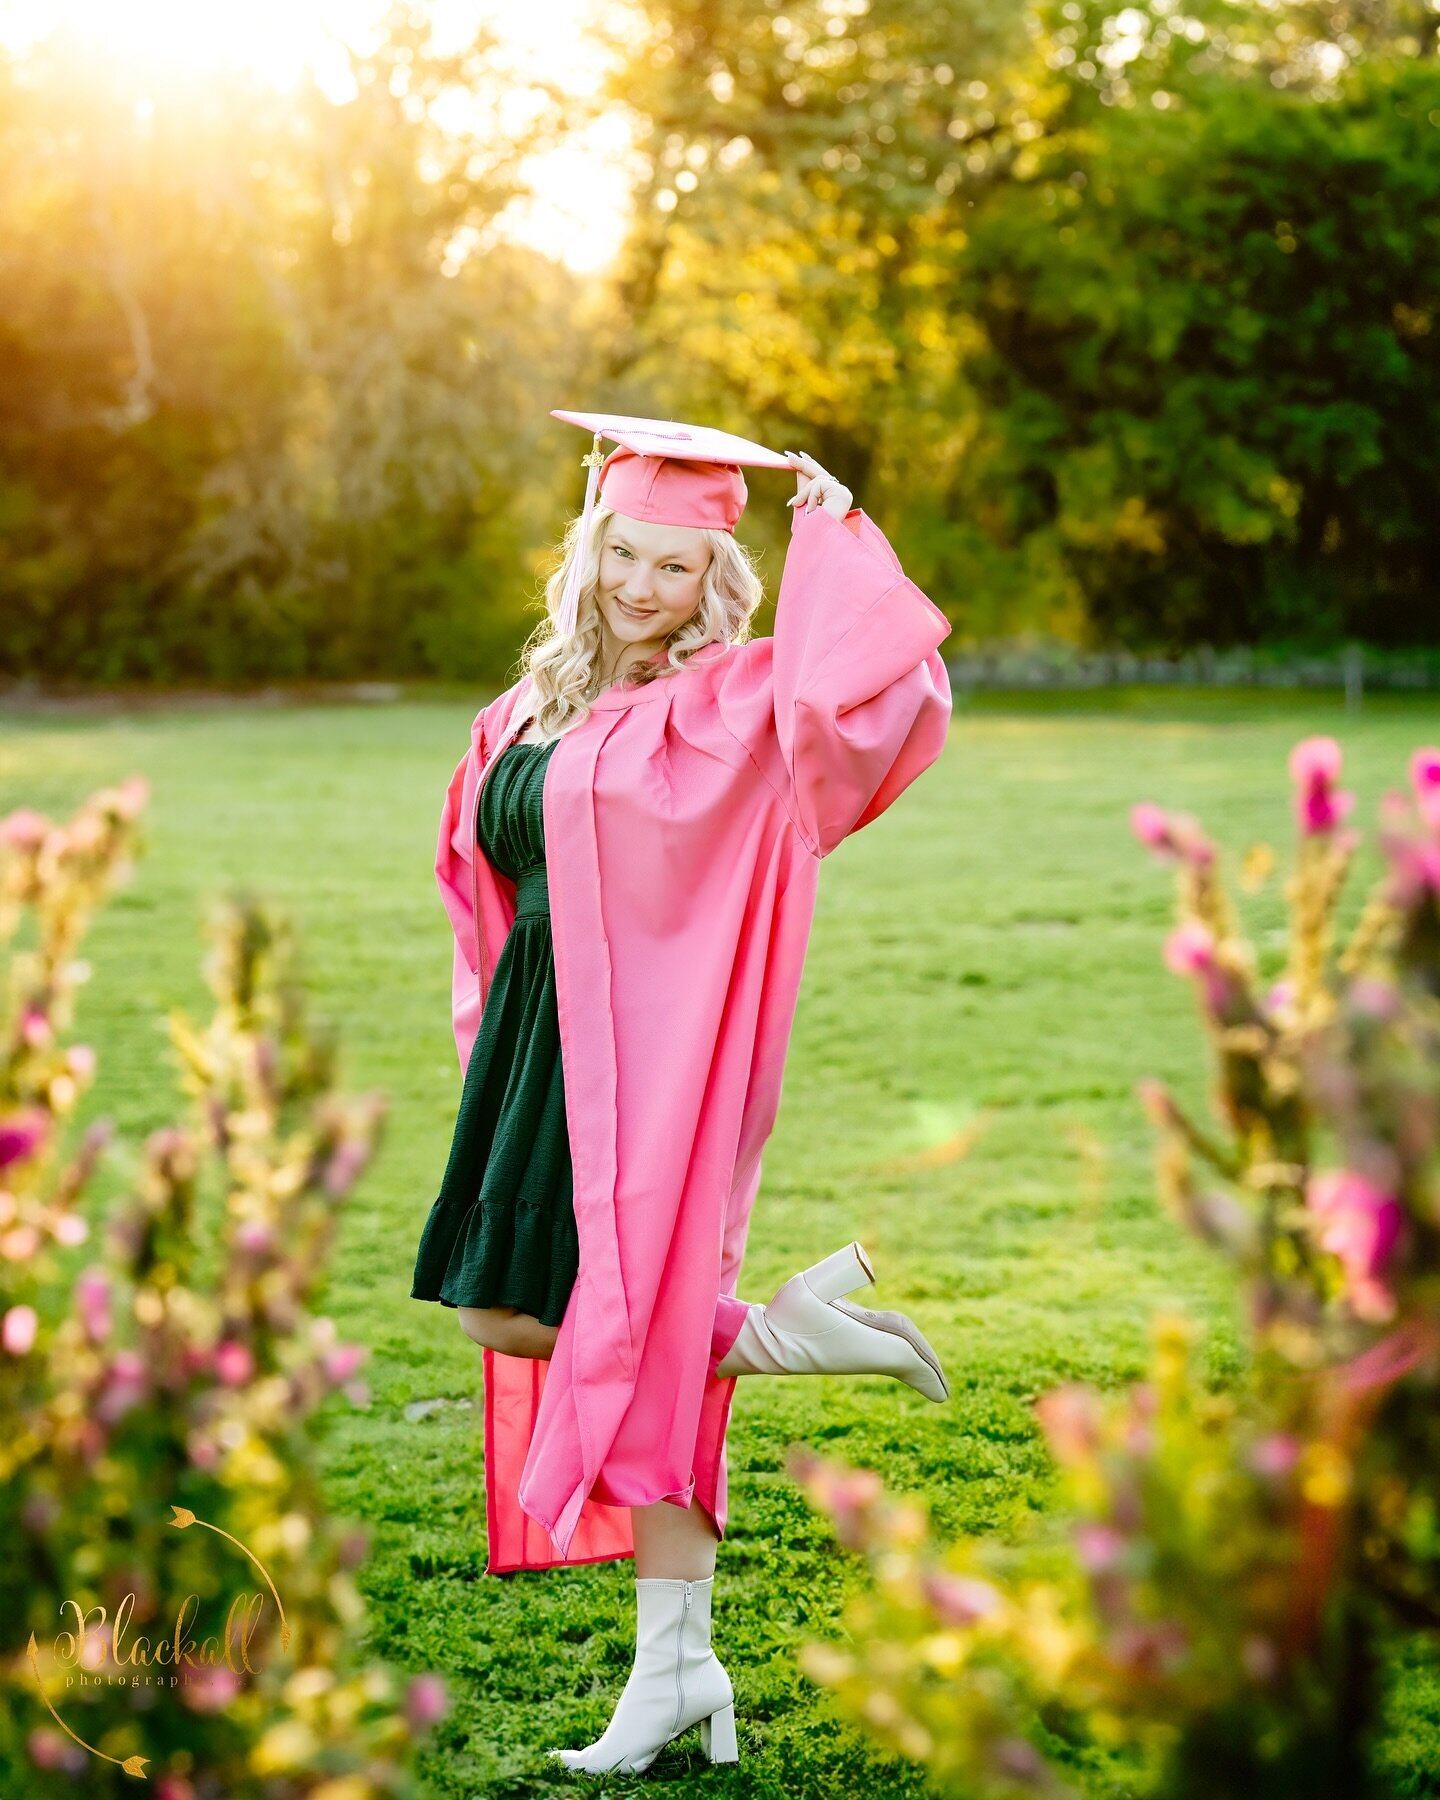 #SENIORSUNDAY 🎓
&zwnj;
&zwnj;If PINK is your color this cute grad cap &amp; gown is in the BP client closet and available to YOU! 💝
&zwnj;
&copy;️Blackall Photography 2024
#BLACKALLPHOTOGRAPHY
#TexasThroughHerLens
#NikonPro
#pink
#LegallyBlonde
#Ba